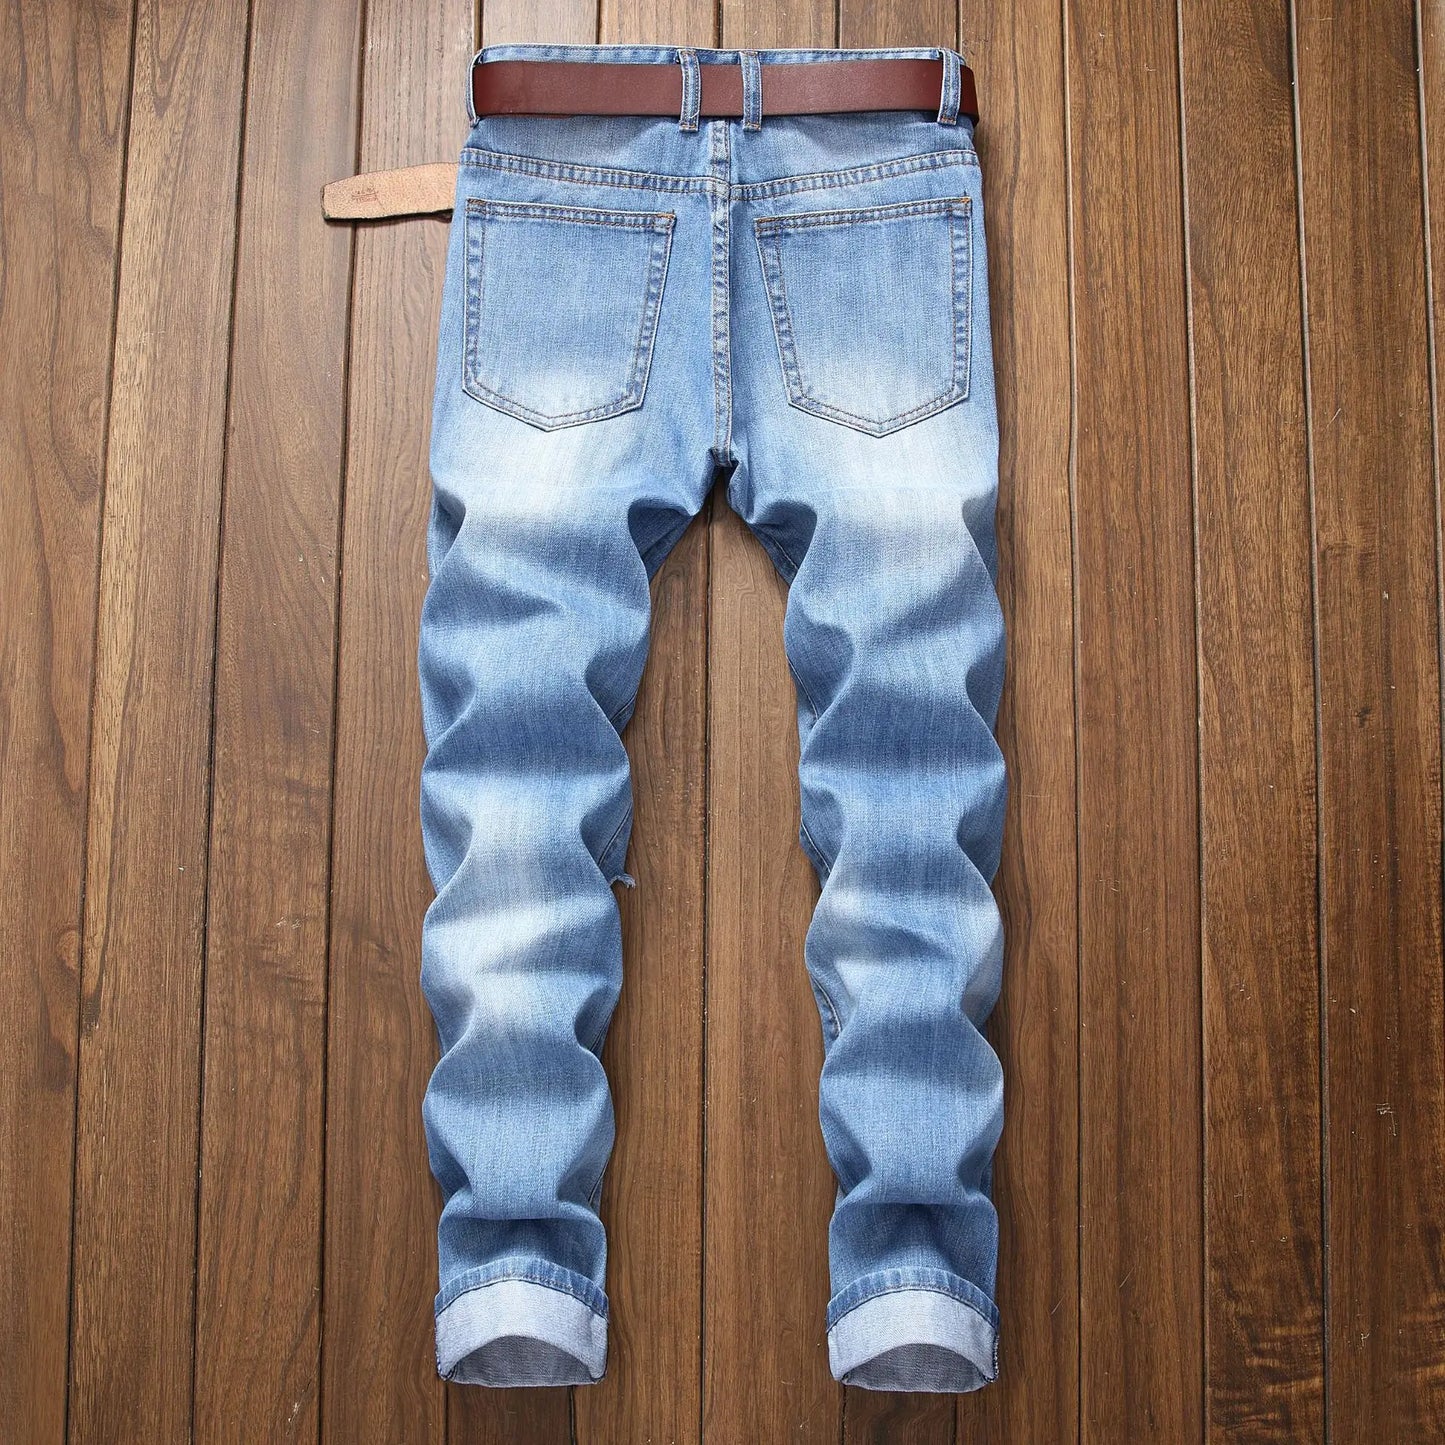 Fall New Men's Wear Ripped Straight Fit Stretchless Jeans Fashionable Blue Casual Social Hip Hop Party High Quality Denim Pants